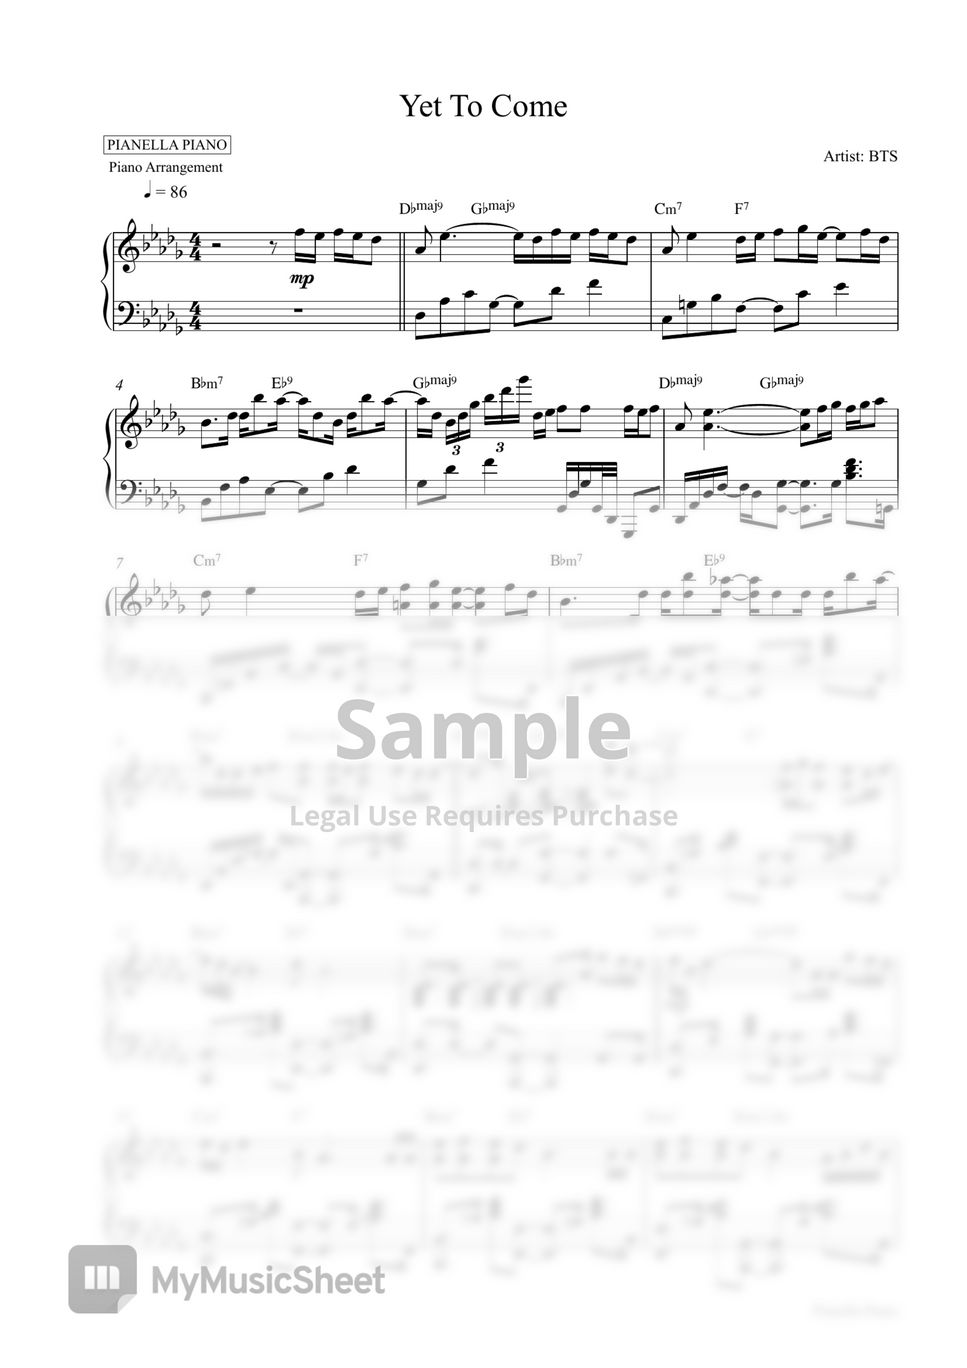 BTS - Yet To Come (Piano Sheet) by Pianella Piano